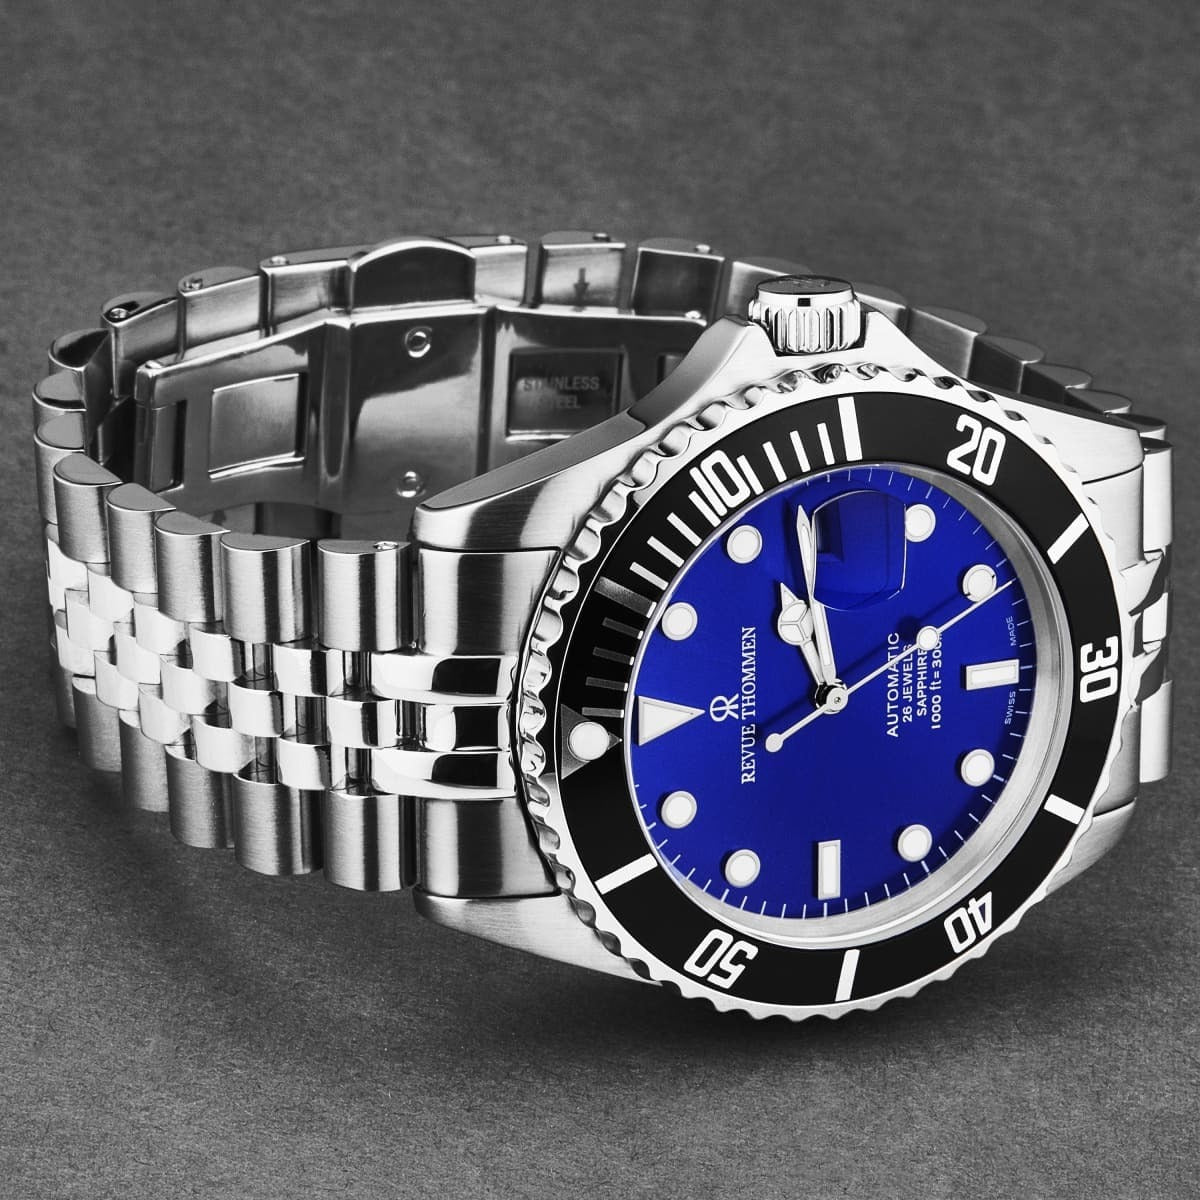 A Revue Thommen Men's 'Diver' Blue Dial Stainless Steel Bracelet Automatic Watch 17571.2223 with blue dial.